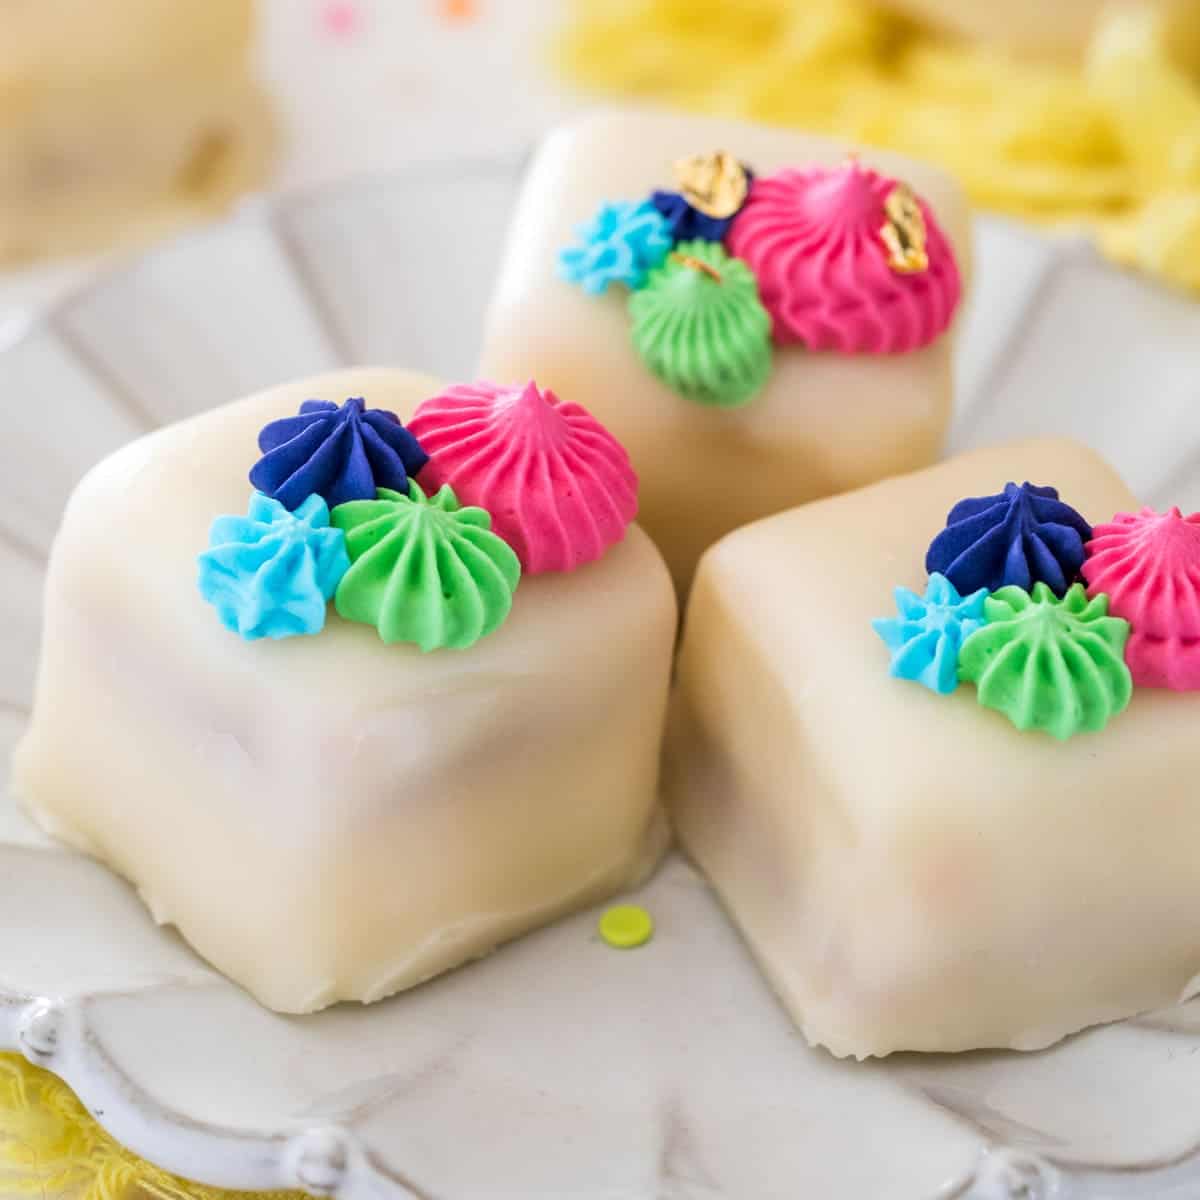 A close-up view of three petit fours placed on a white plate with colorful frosting on top.